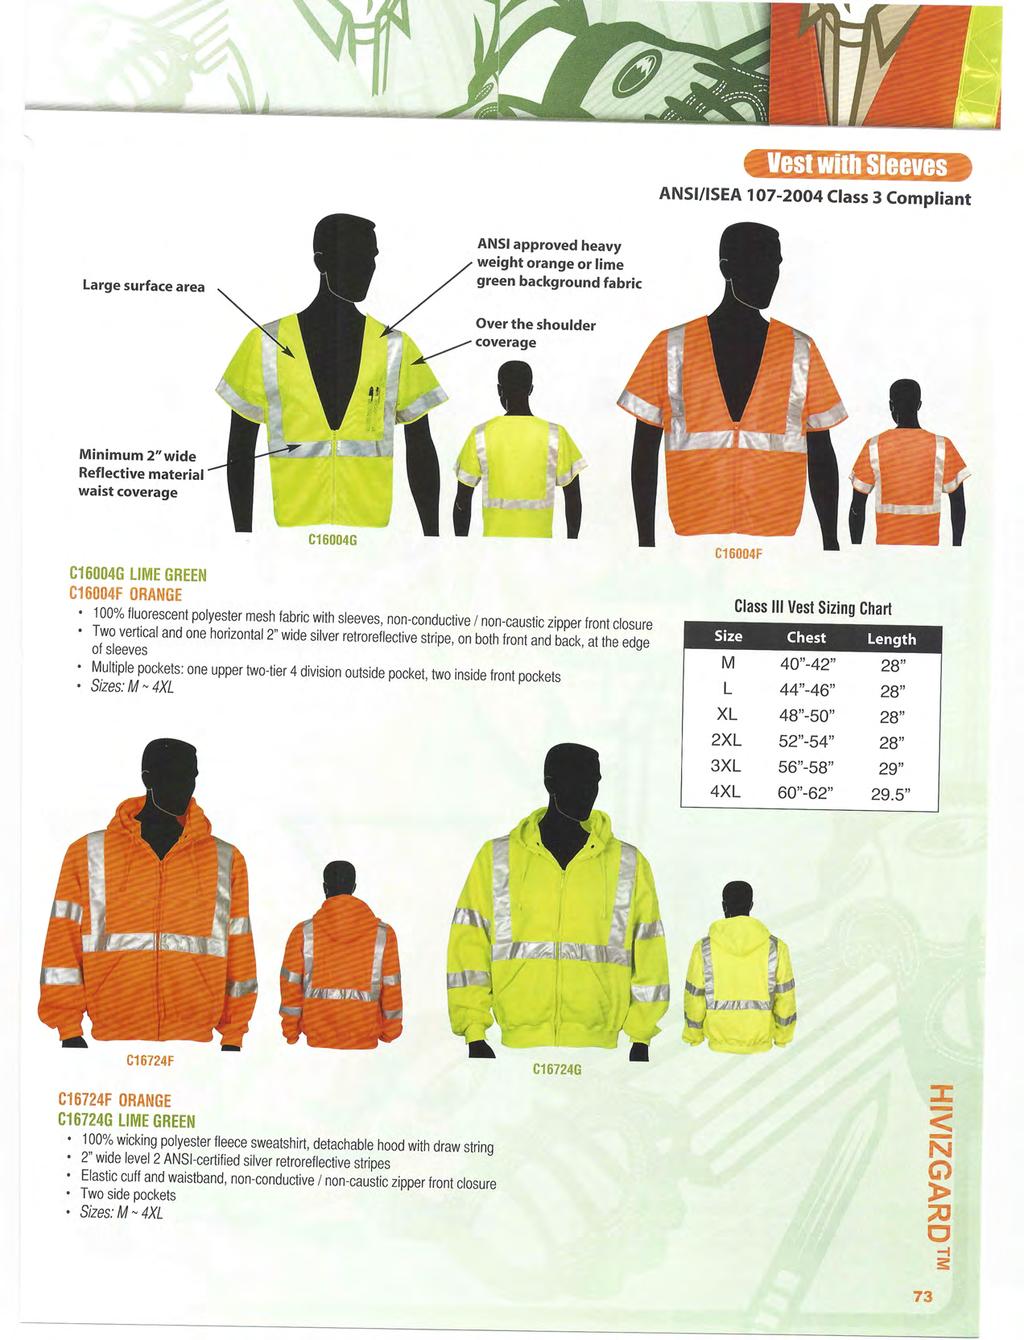 't 1 11,'l U tf i taa 1 t» ANSI/ISEA 17-24 Class 3 Compliant Large surface area Minimum 2"wide Reflective material waist coverage C164G LIME GREEN C164F ORANGE 1% fluorescent polyester mesh fabric